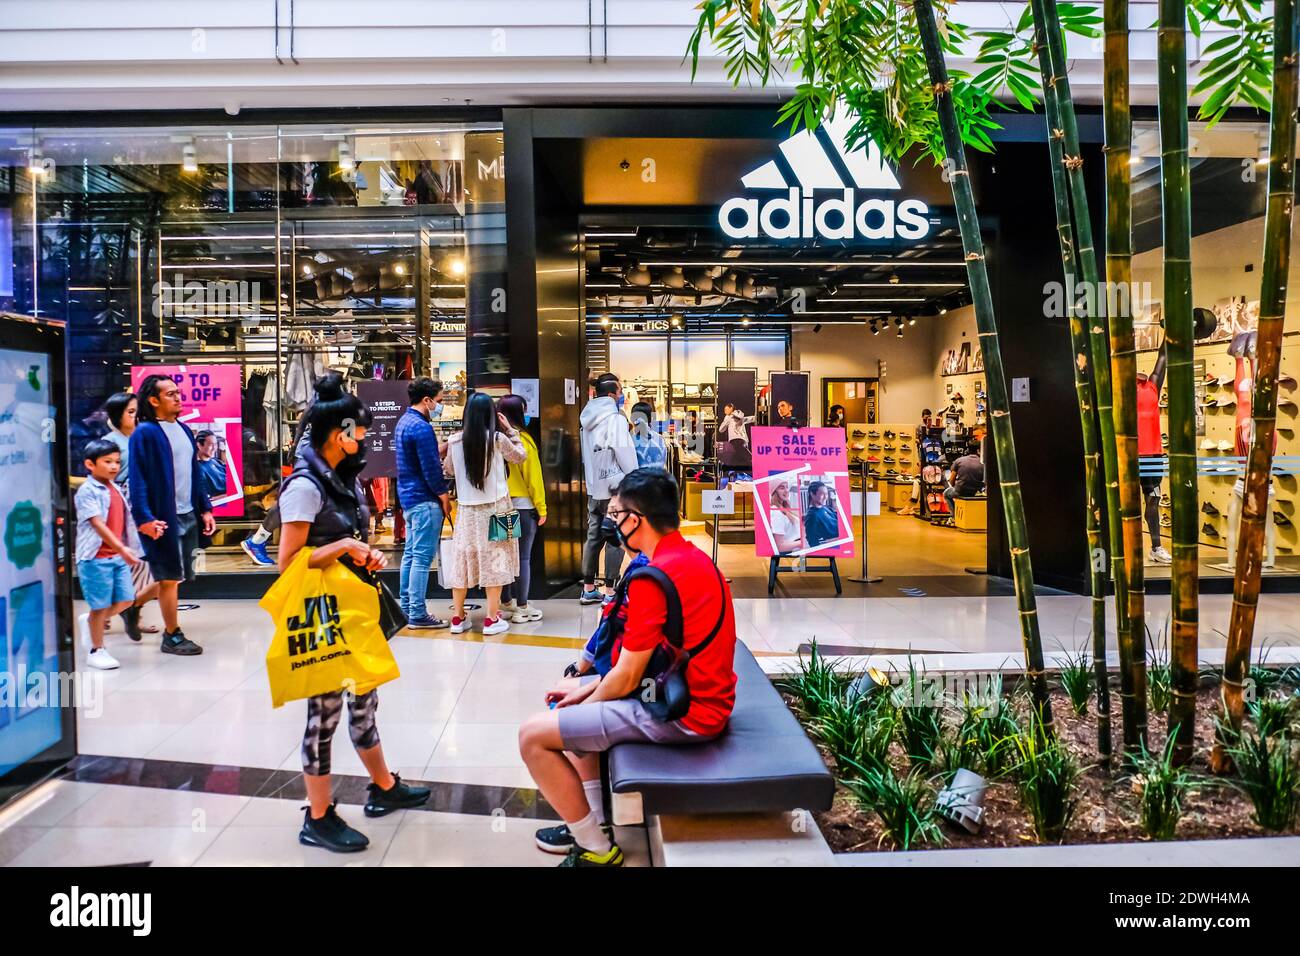 Melbourne, Australia. 23rd Dec, 2020. A man sitting outside while others  lining up at Adidas store during Christmas shopping in Chadstone Shopping  Centre - The Fashion Capital of Melbourne. Credit: SOPA Images